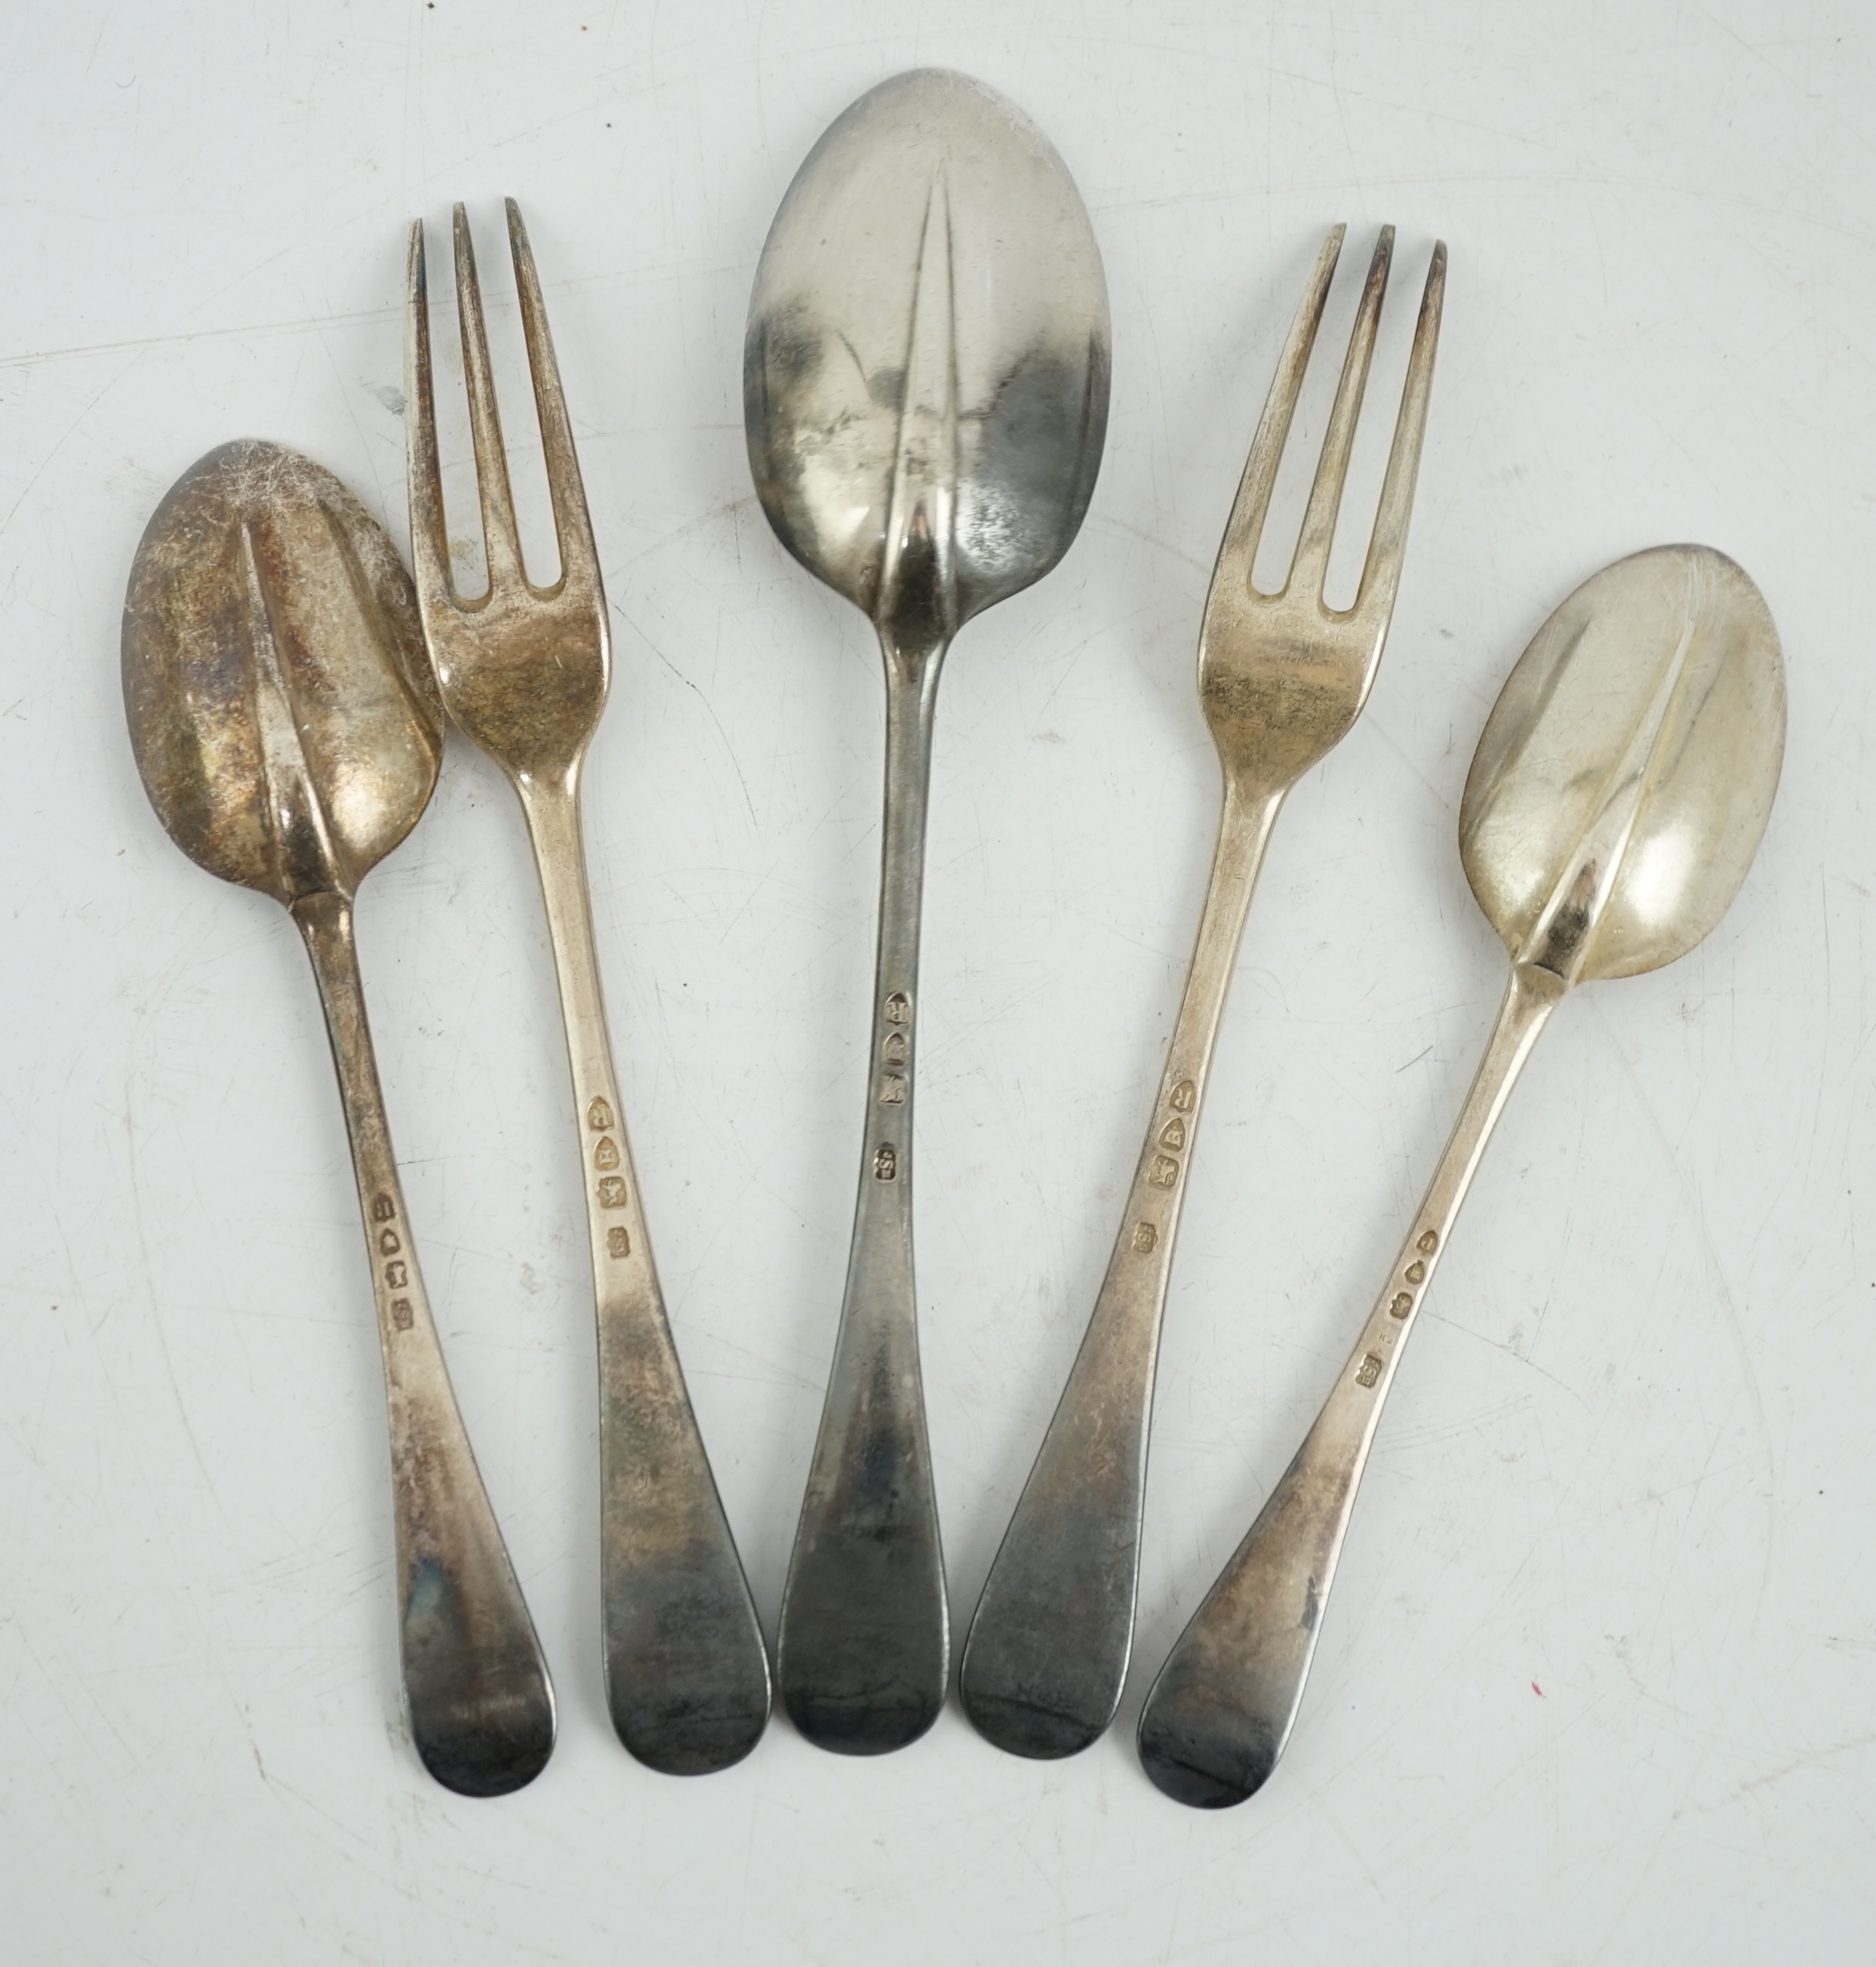 Sundry silver, consisting of three pieces of George III flatware, two 800 standard coffee spoons, a pair of candlesticks(a.f.), a lidded glass preserve pot, clothes brush, two pepperettes and a desk seal.